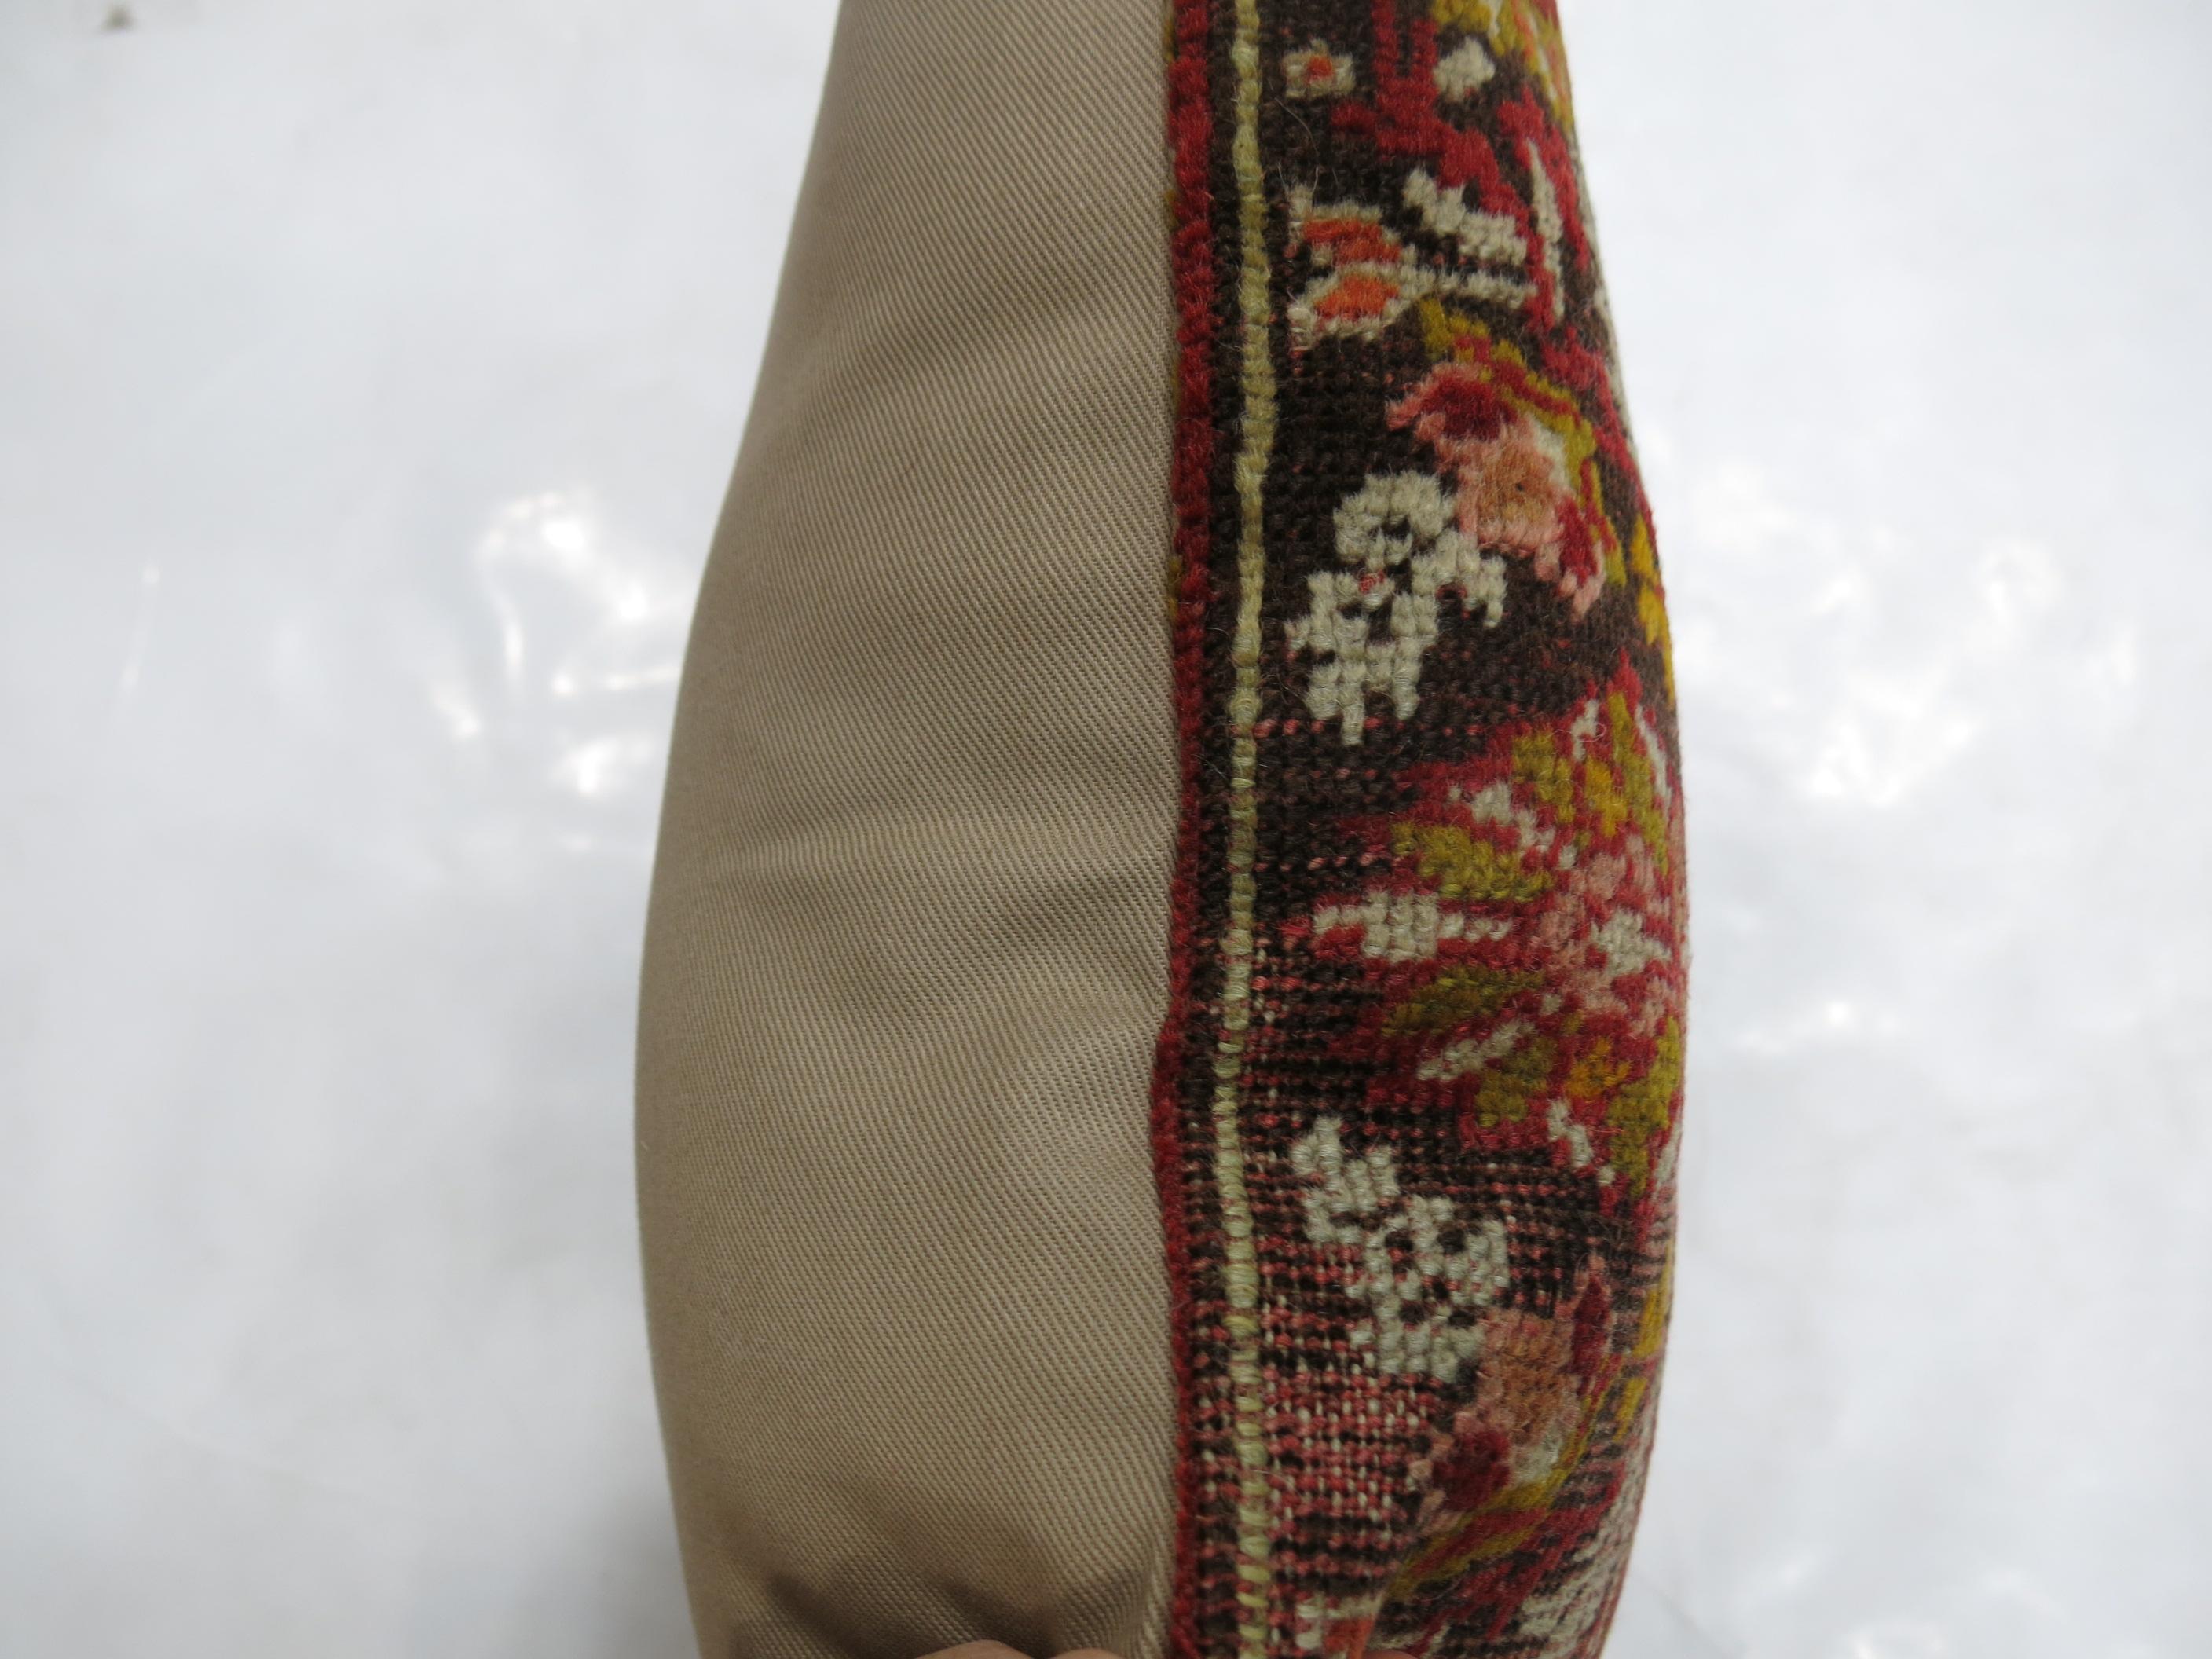 Pillow made from an antique Turkish rug from the early 20th century.

Measures: 18